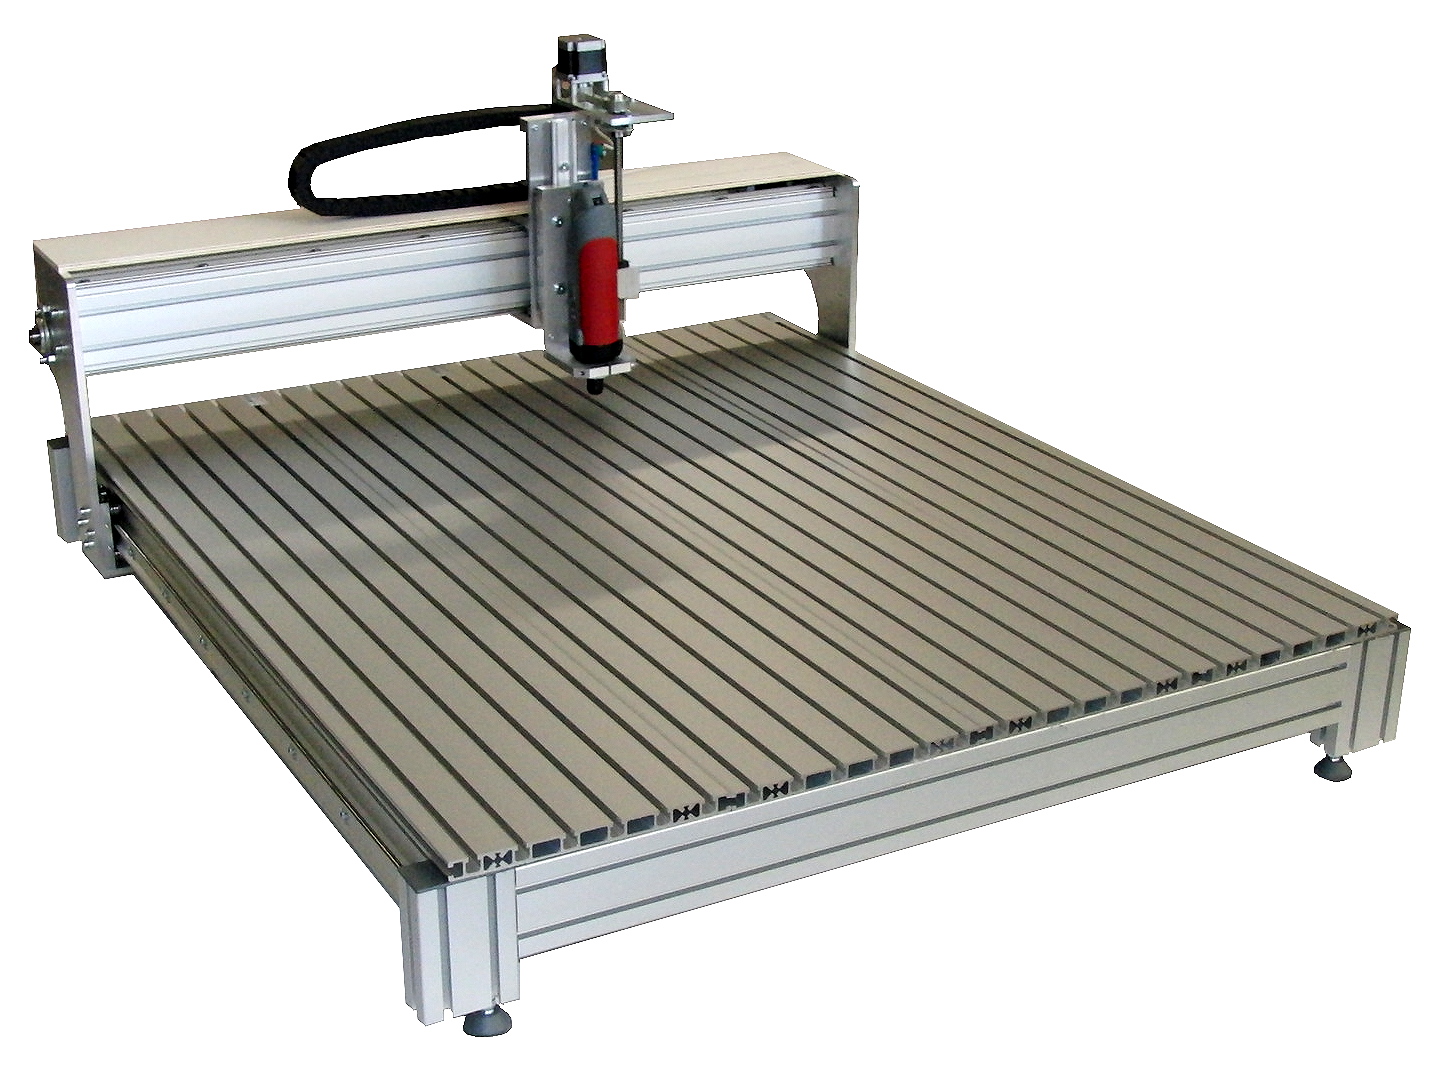 T-Grooved Table Pro Basic/Vario 10-10 1500mm x 1080mm